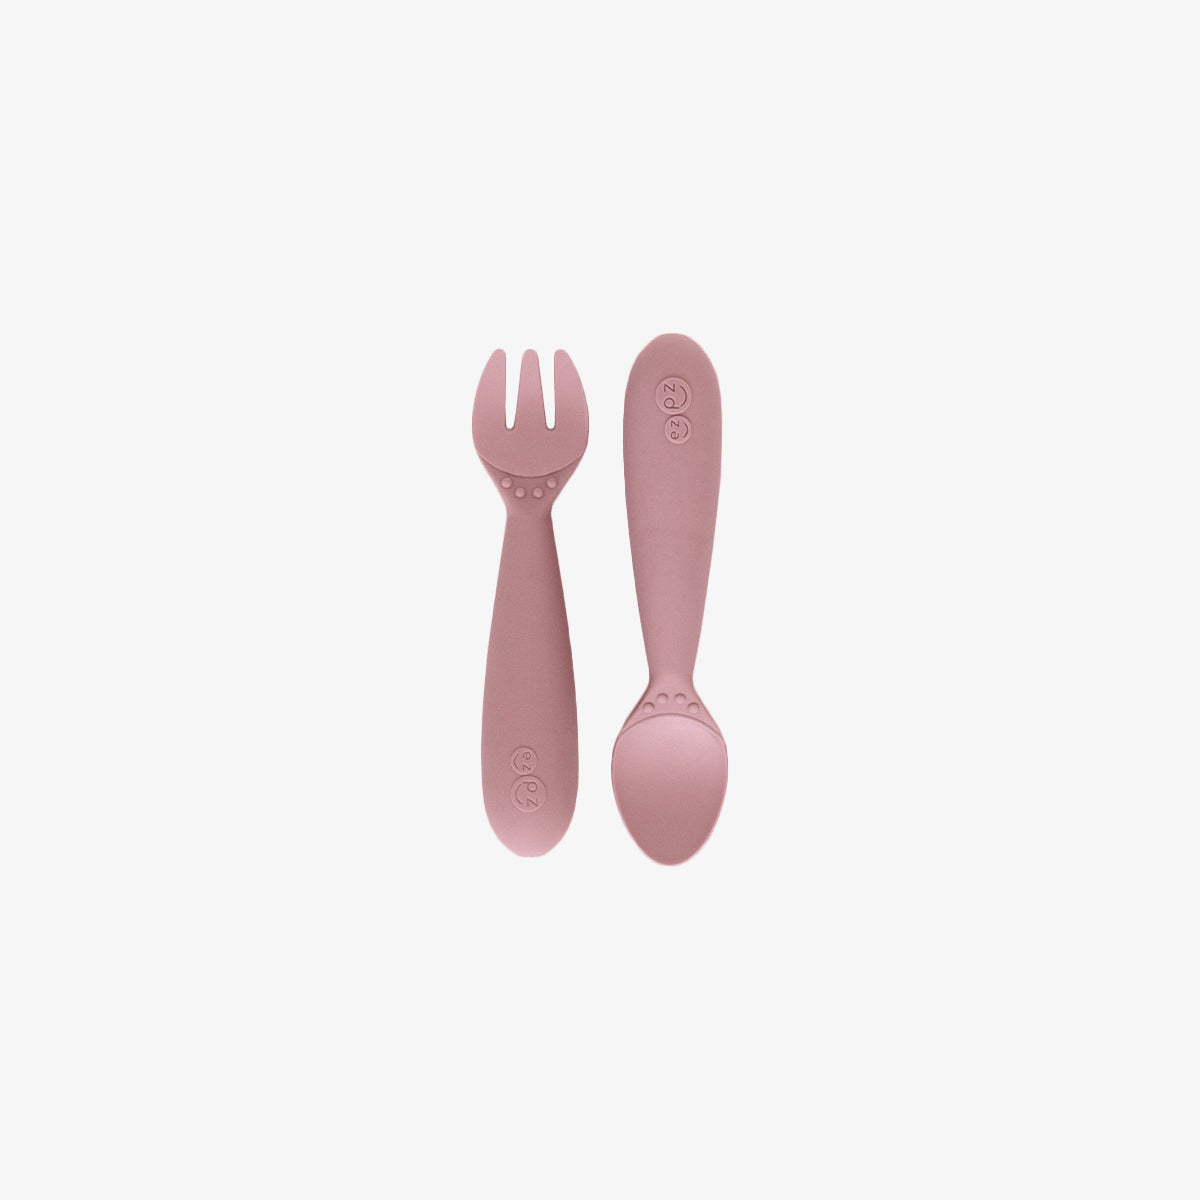 Mini Utensils in Blush by ezpz / Sensory Silicone Fork & Spoon for Toddlers